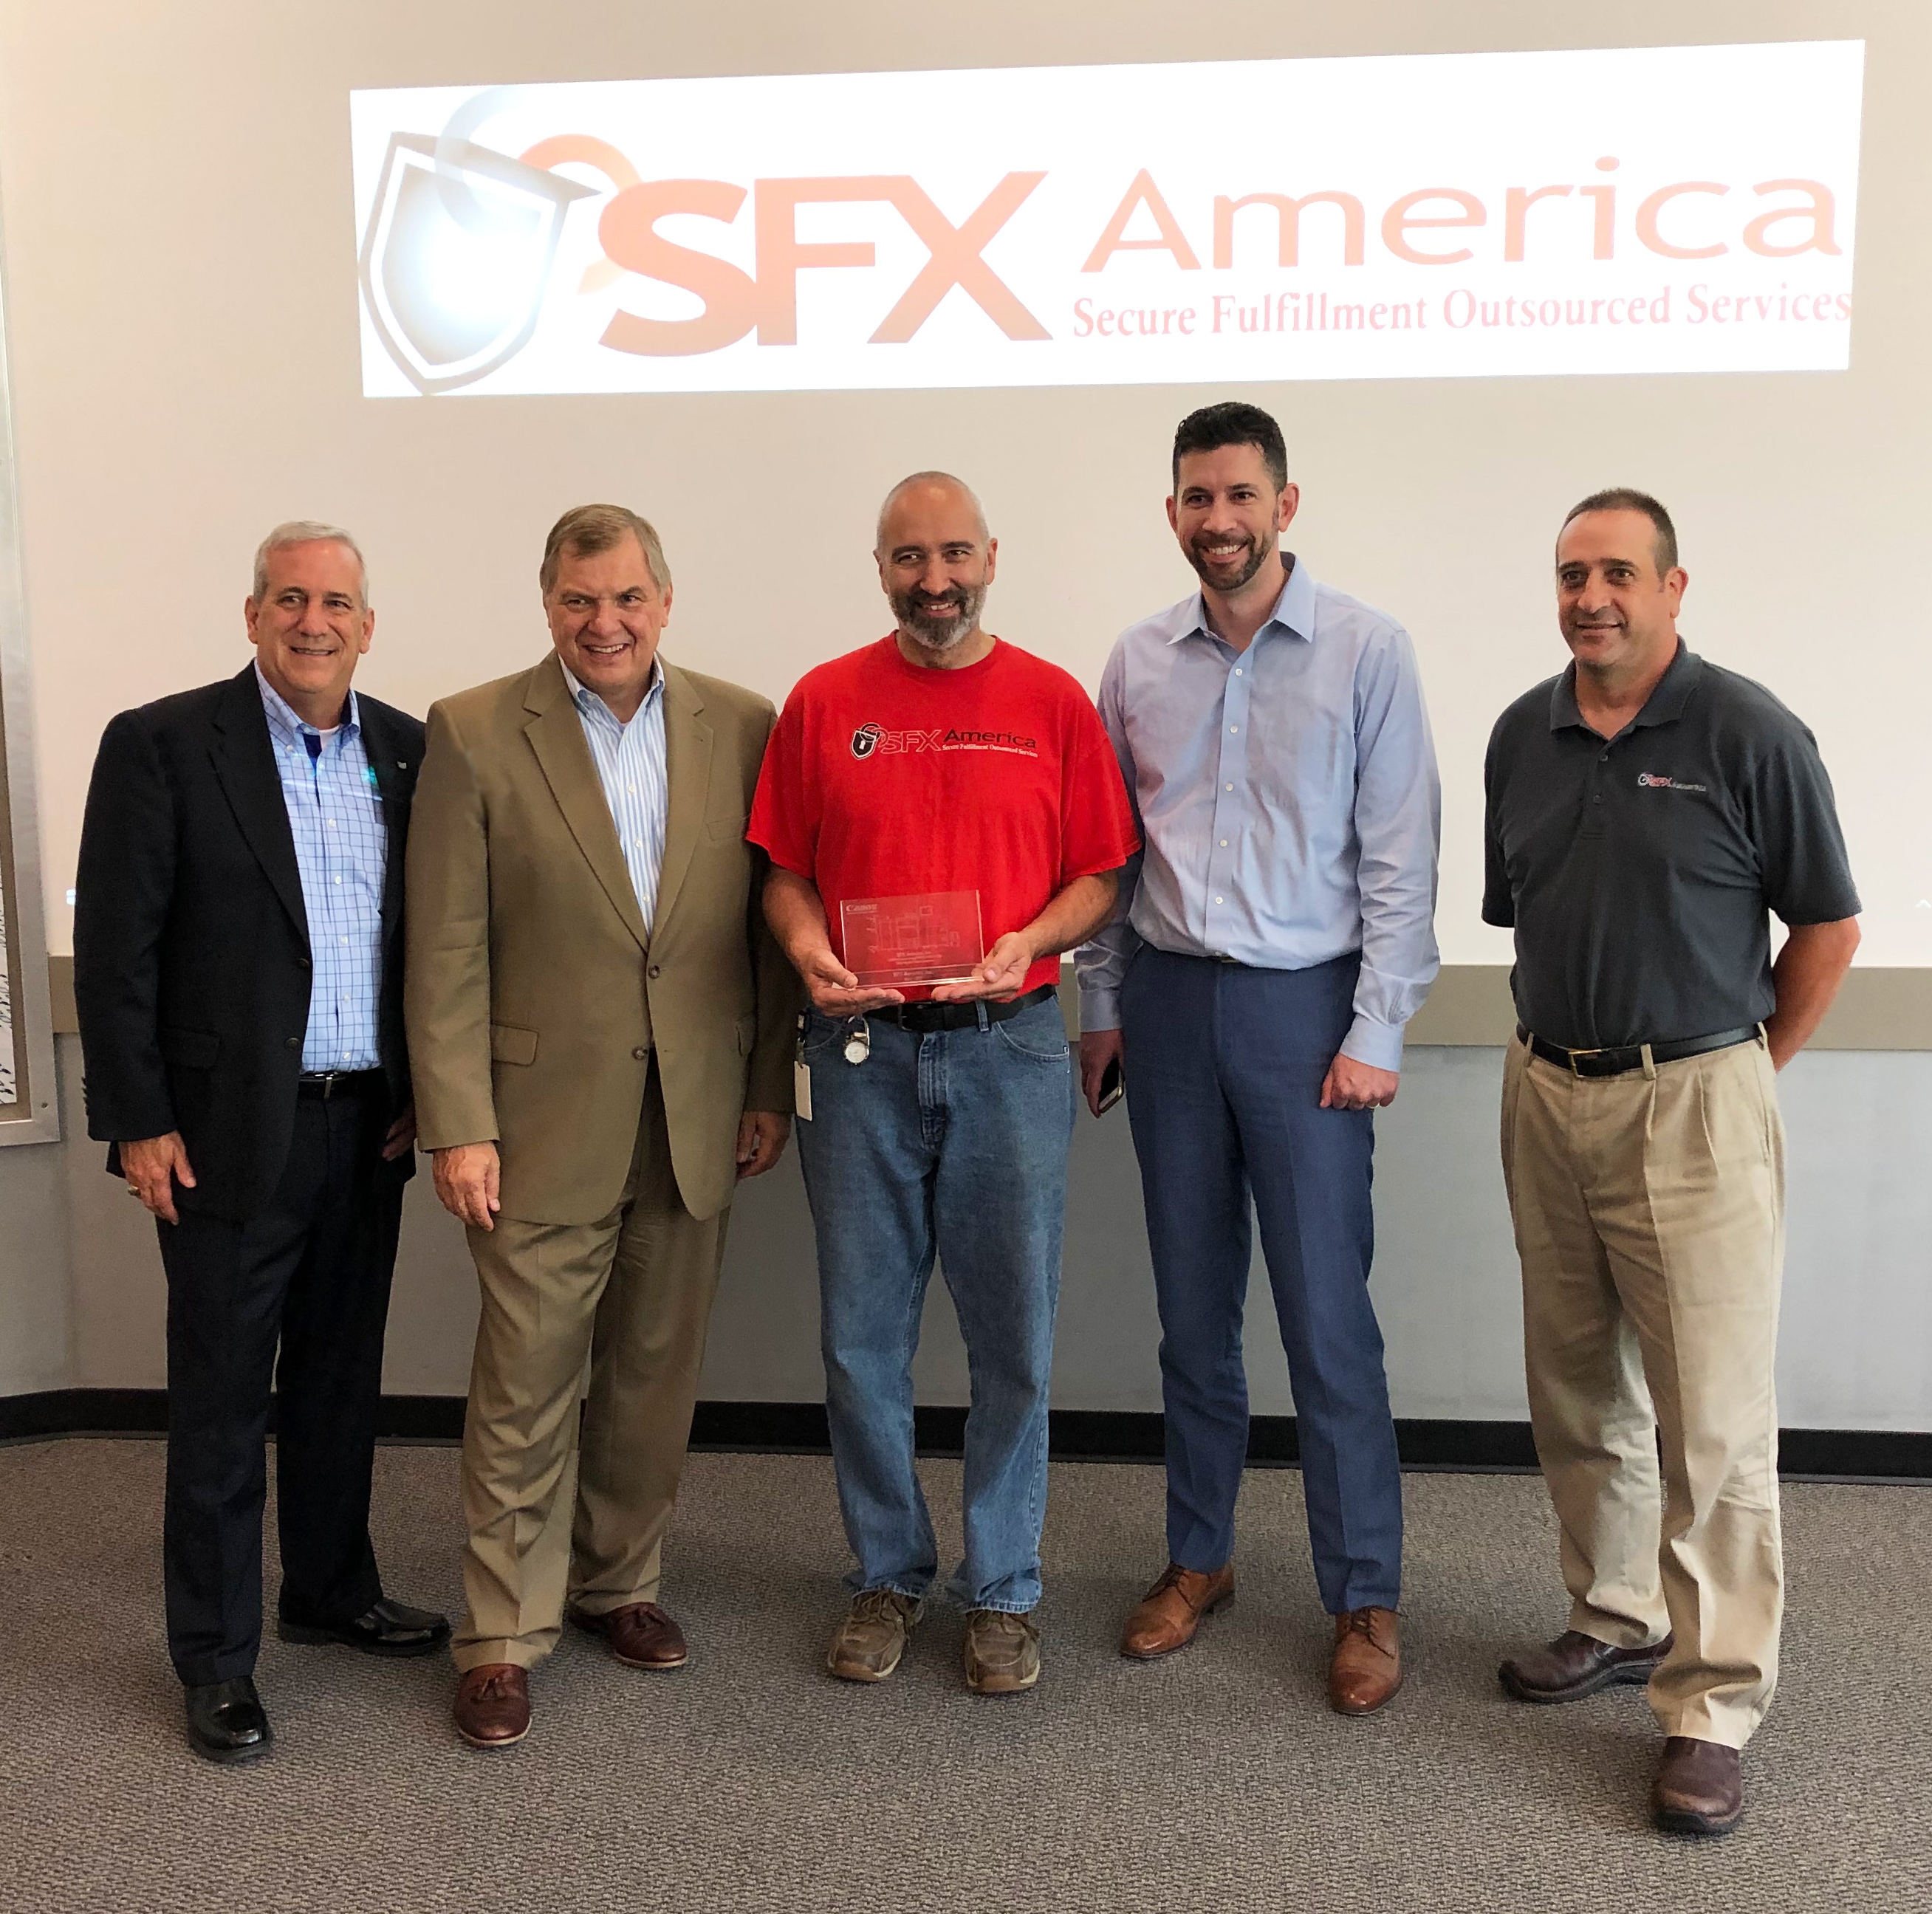 Canon Solutions America President, Peter Kowalczuk, presented SFX America with a plaque to commemorate the milestone of the 5000th imagePRESS installation.